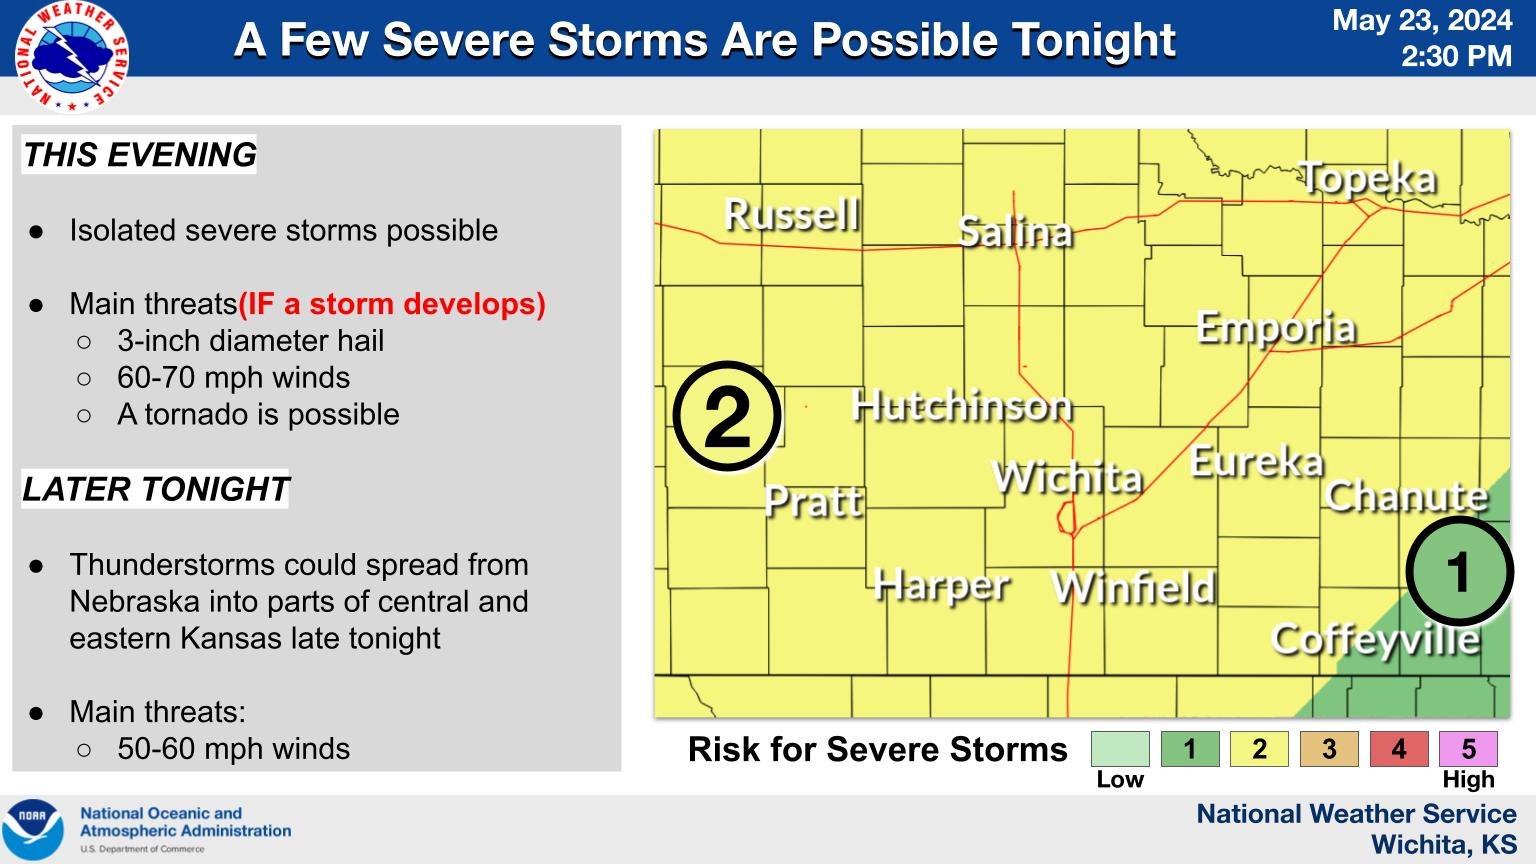 Hail, High Winds and Tornadoes Possible This Afternoon/Evening